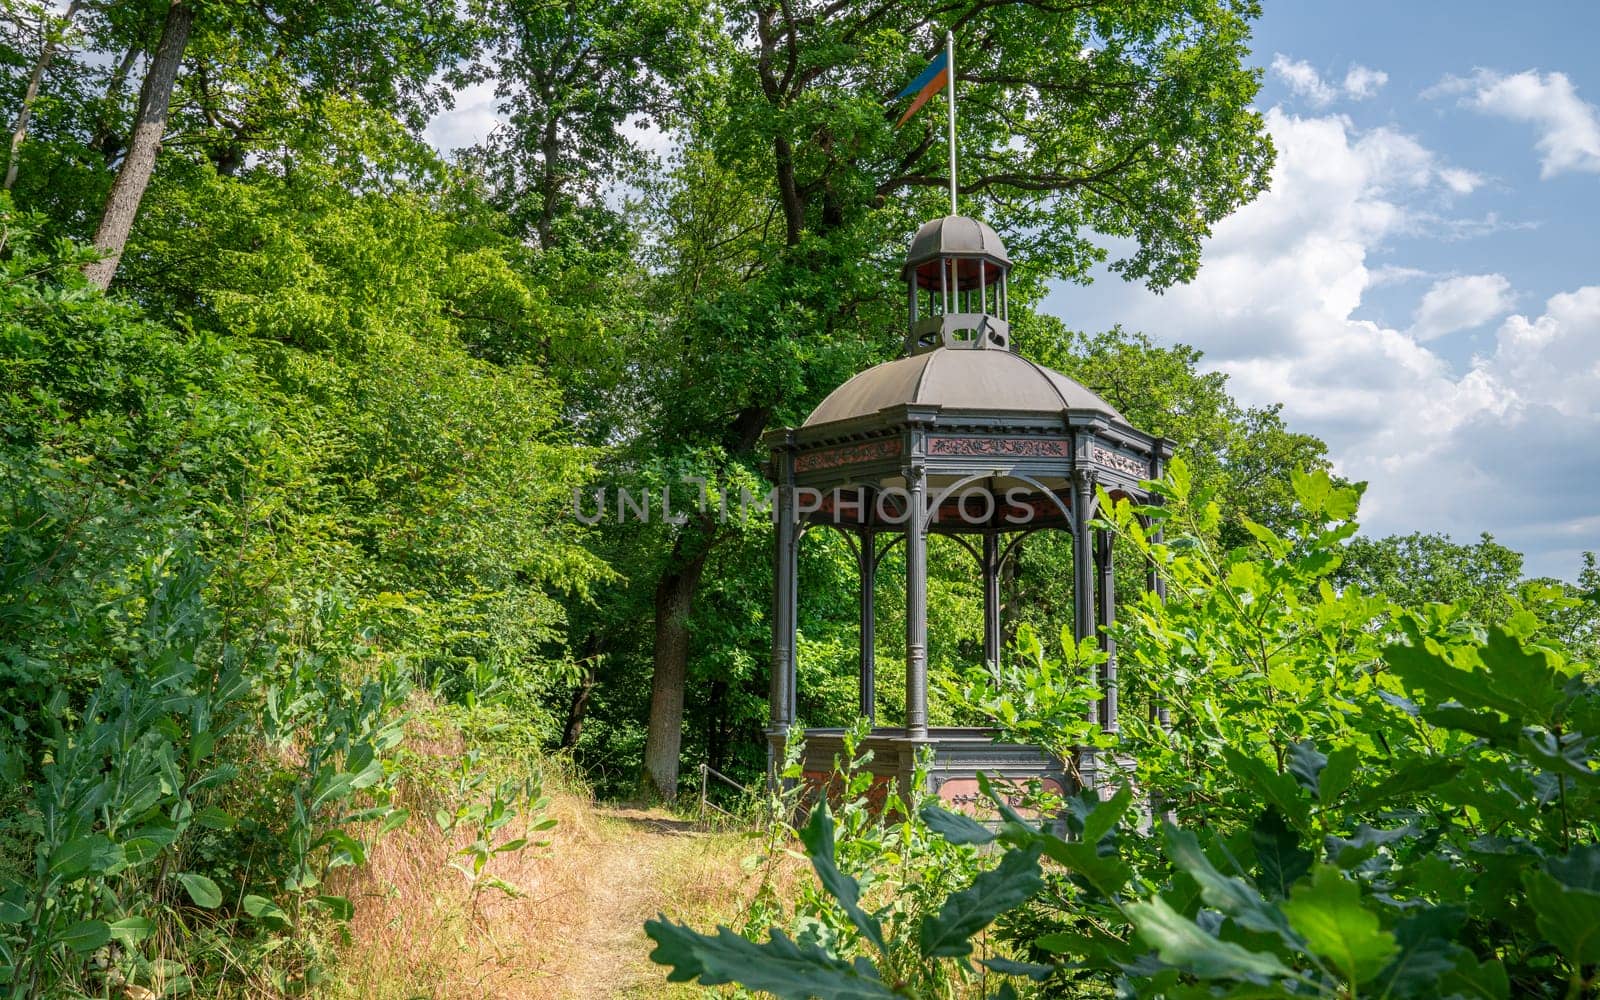 Panoramic image of old viewpoint Bismarck temple close to Dillenburg, Hesse, Germany